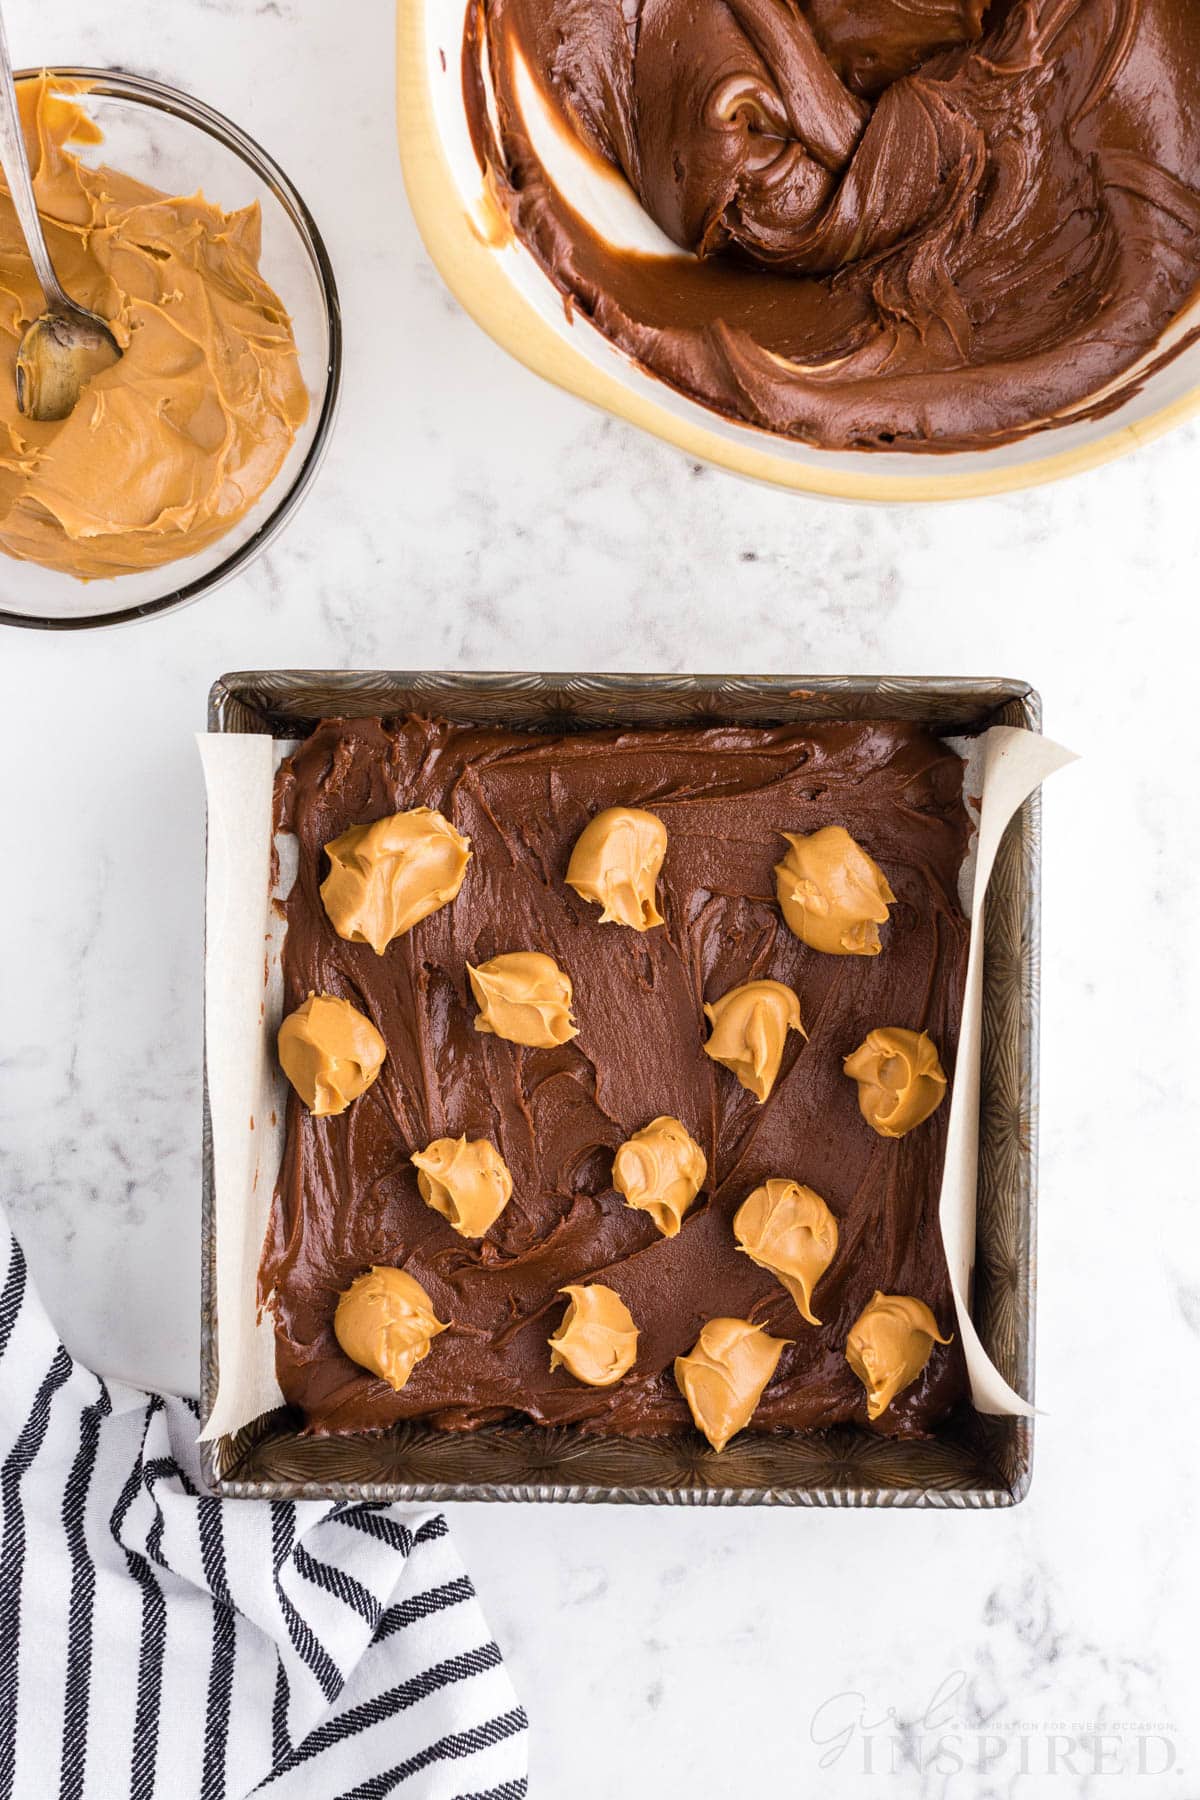 Baking tray with chocolate peanut butter fudge mixture and dollops of creamy peanut butter on top, glass bowl of creamy peanut butter, mixing bowl with fudge mixture, striped linen, on a marble countertop.